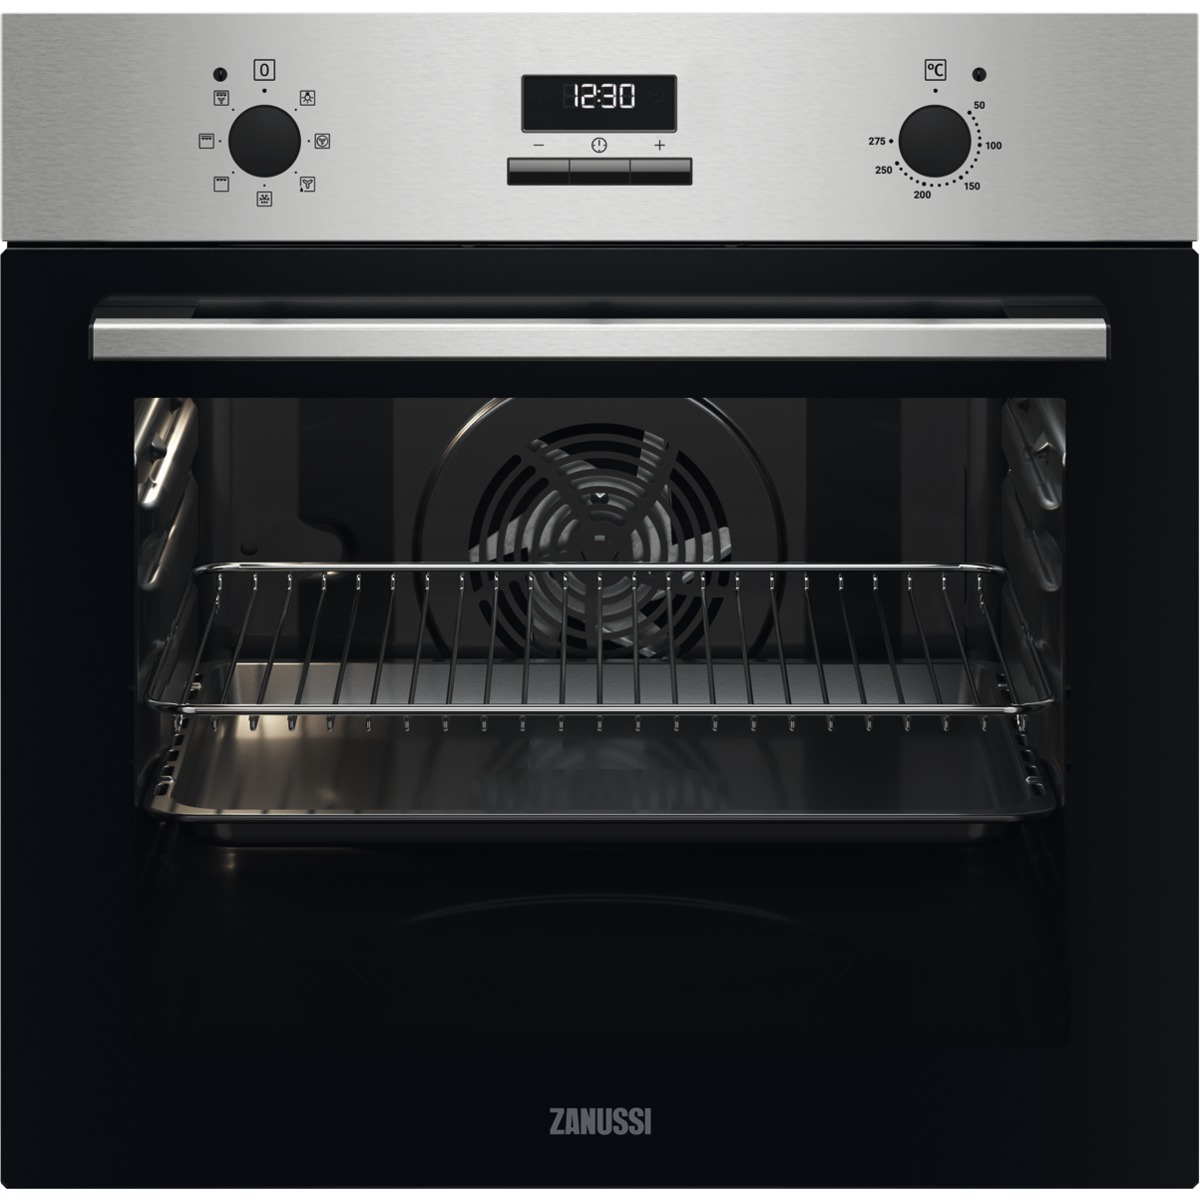 Zanussi Built-in Single Electric Oven with Fan Stainless Steel